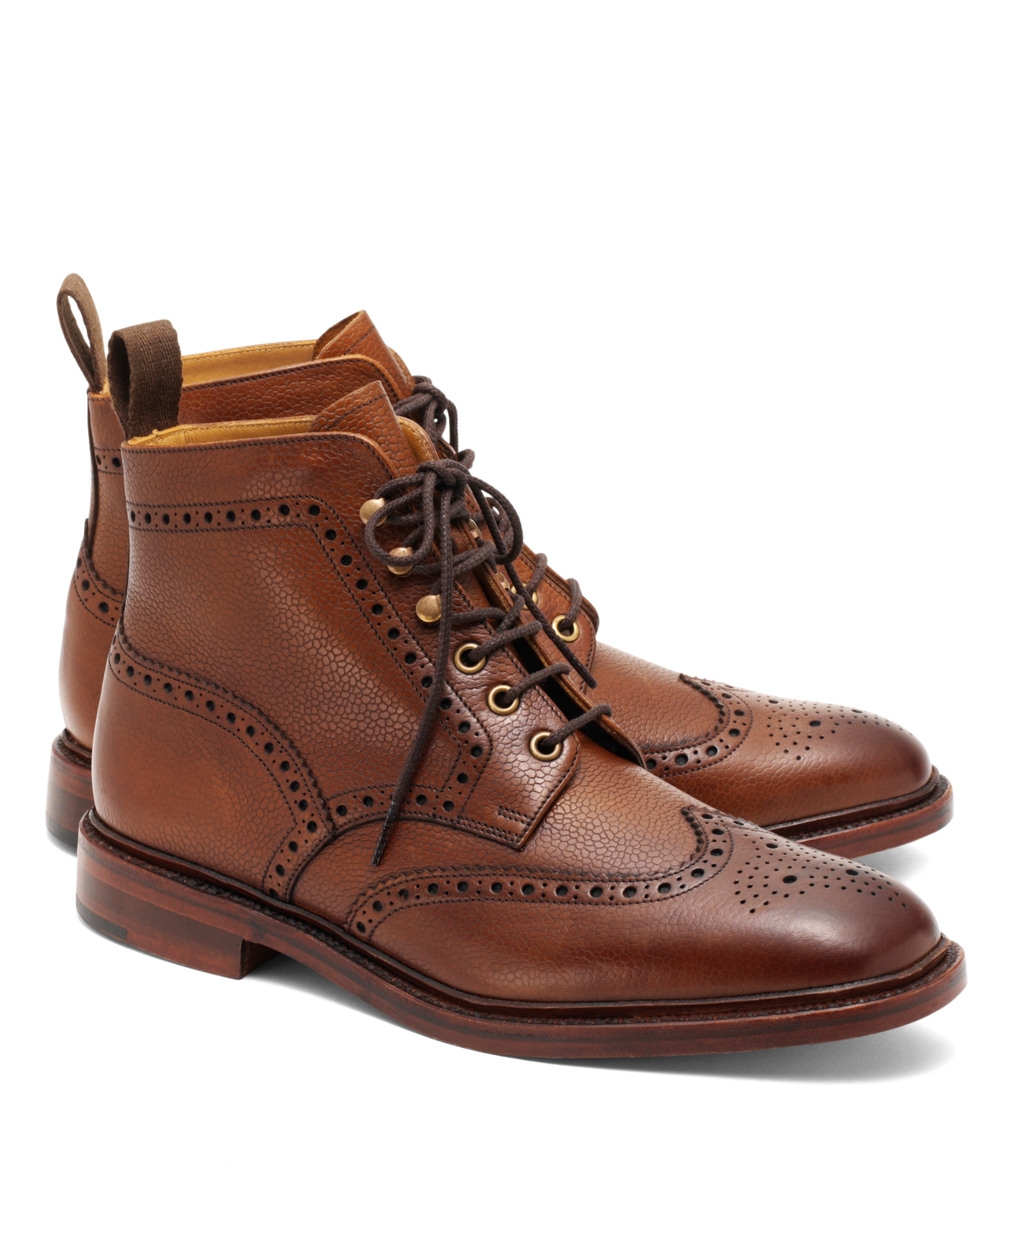 Lyst - Brooks Brothers Pebble Wingtip Boots in Brown for Men